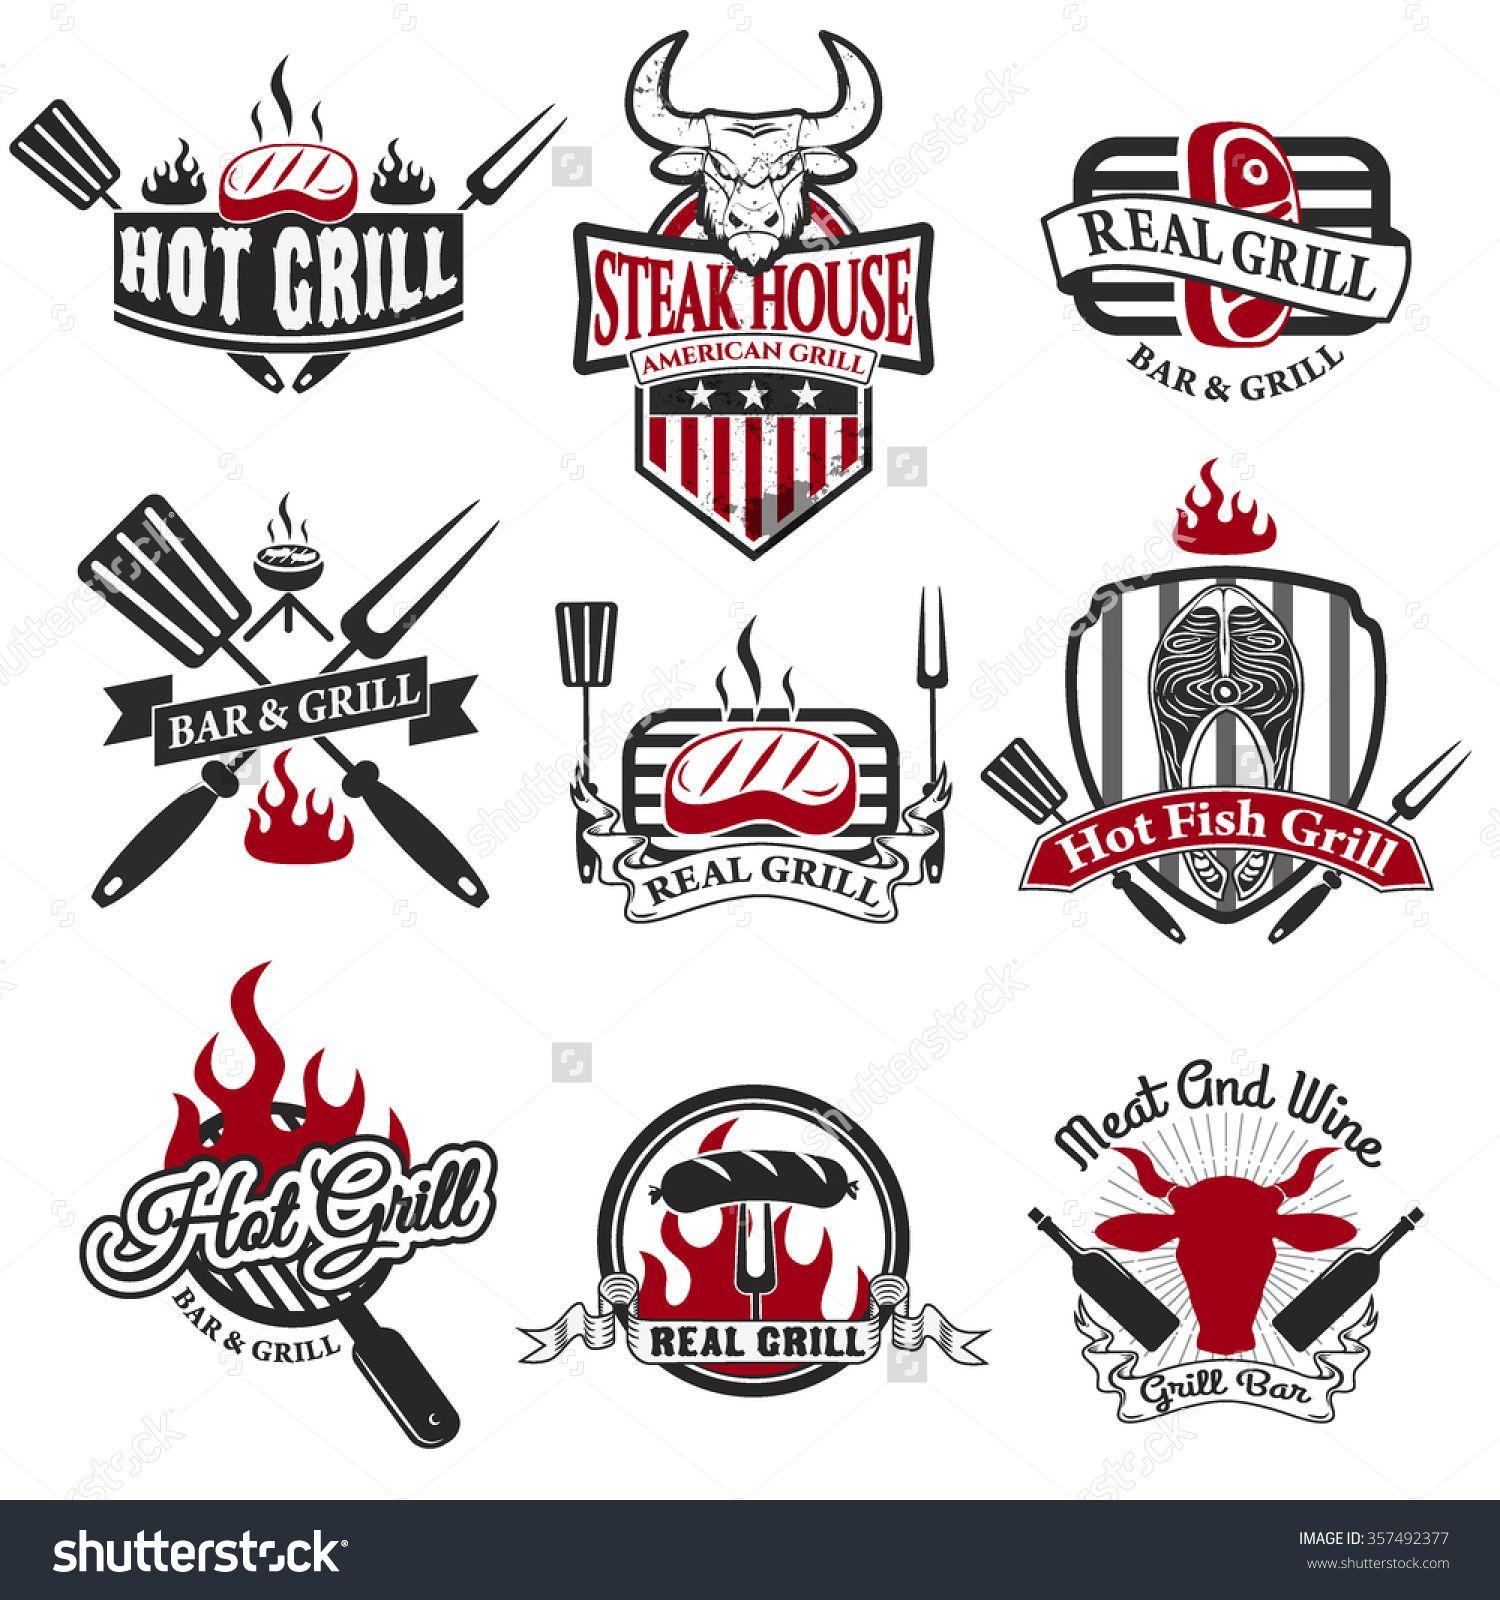 Restaurant Bar and Grill Logo - Set of grill bar labels, logos and badges templates. Steak house ...